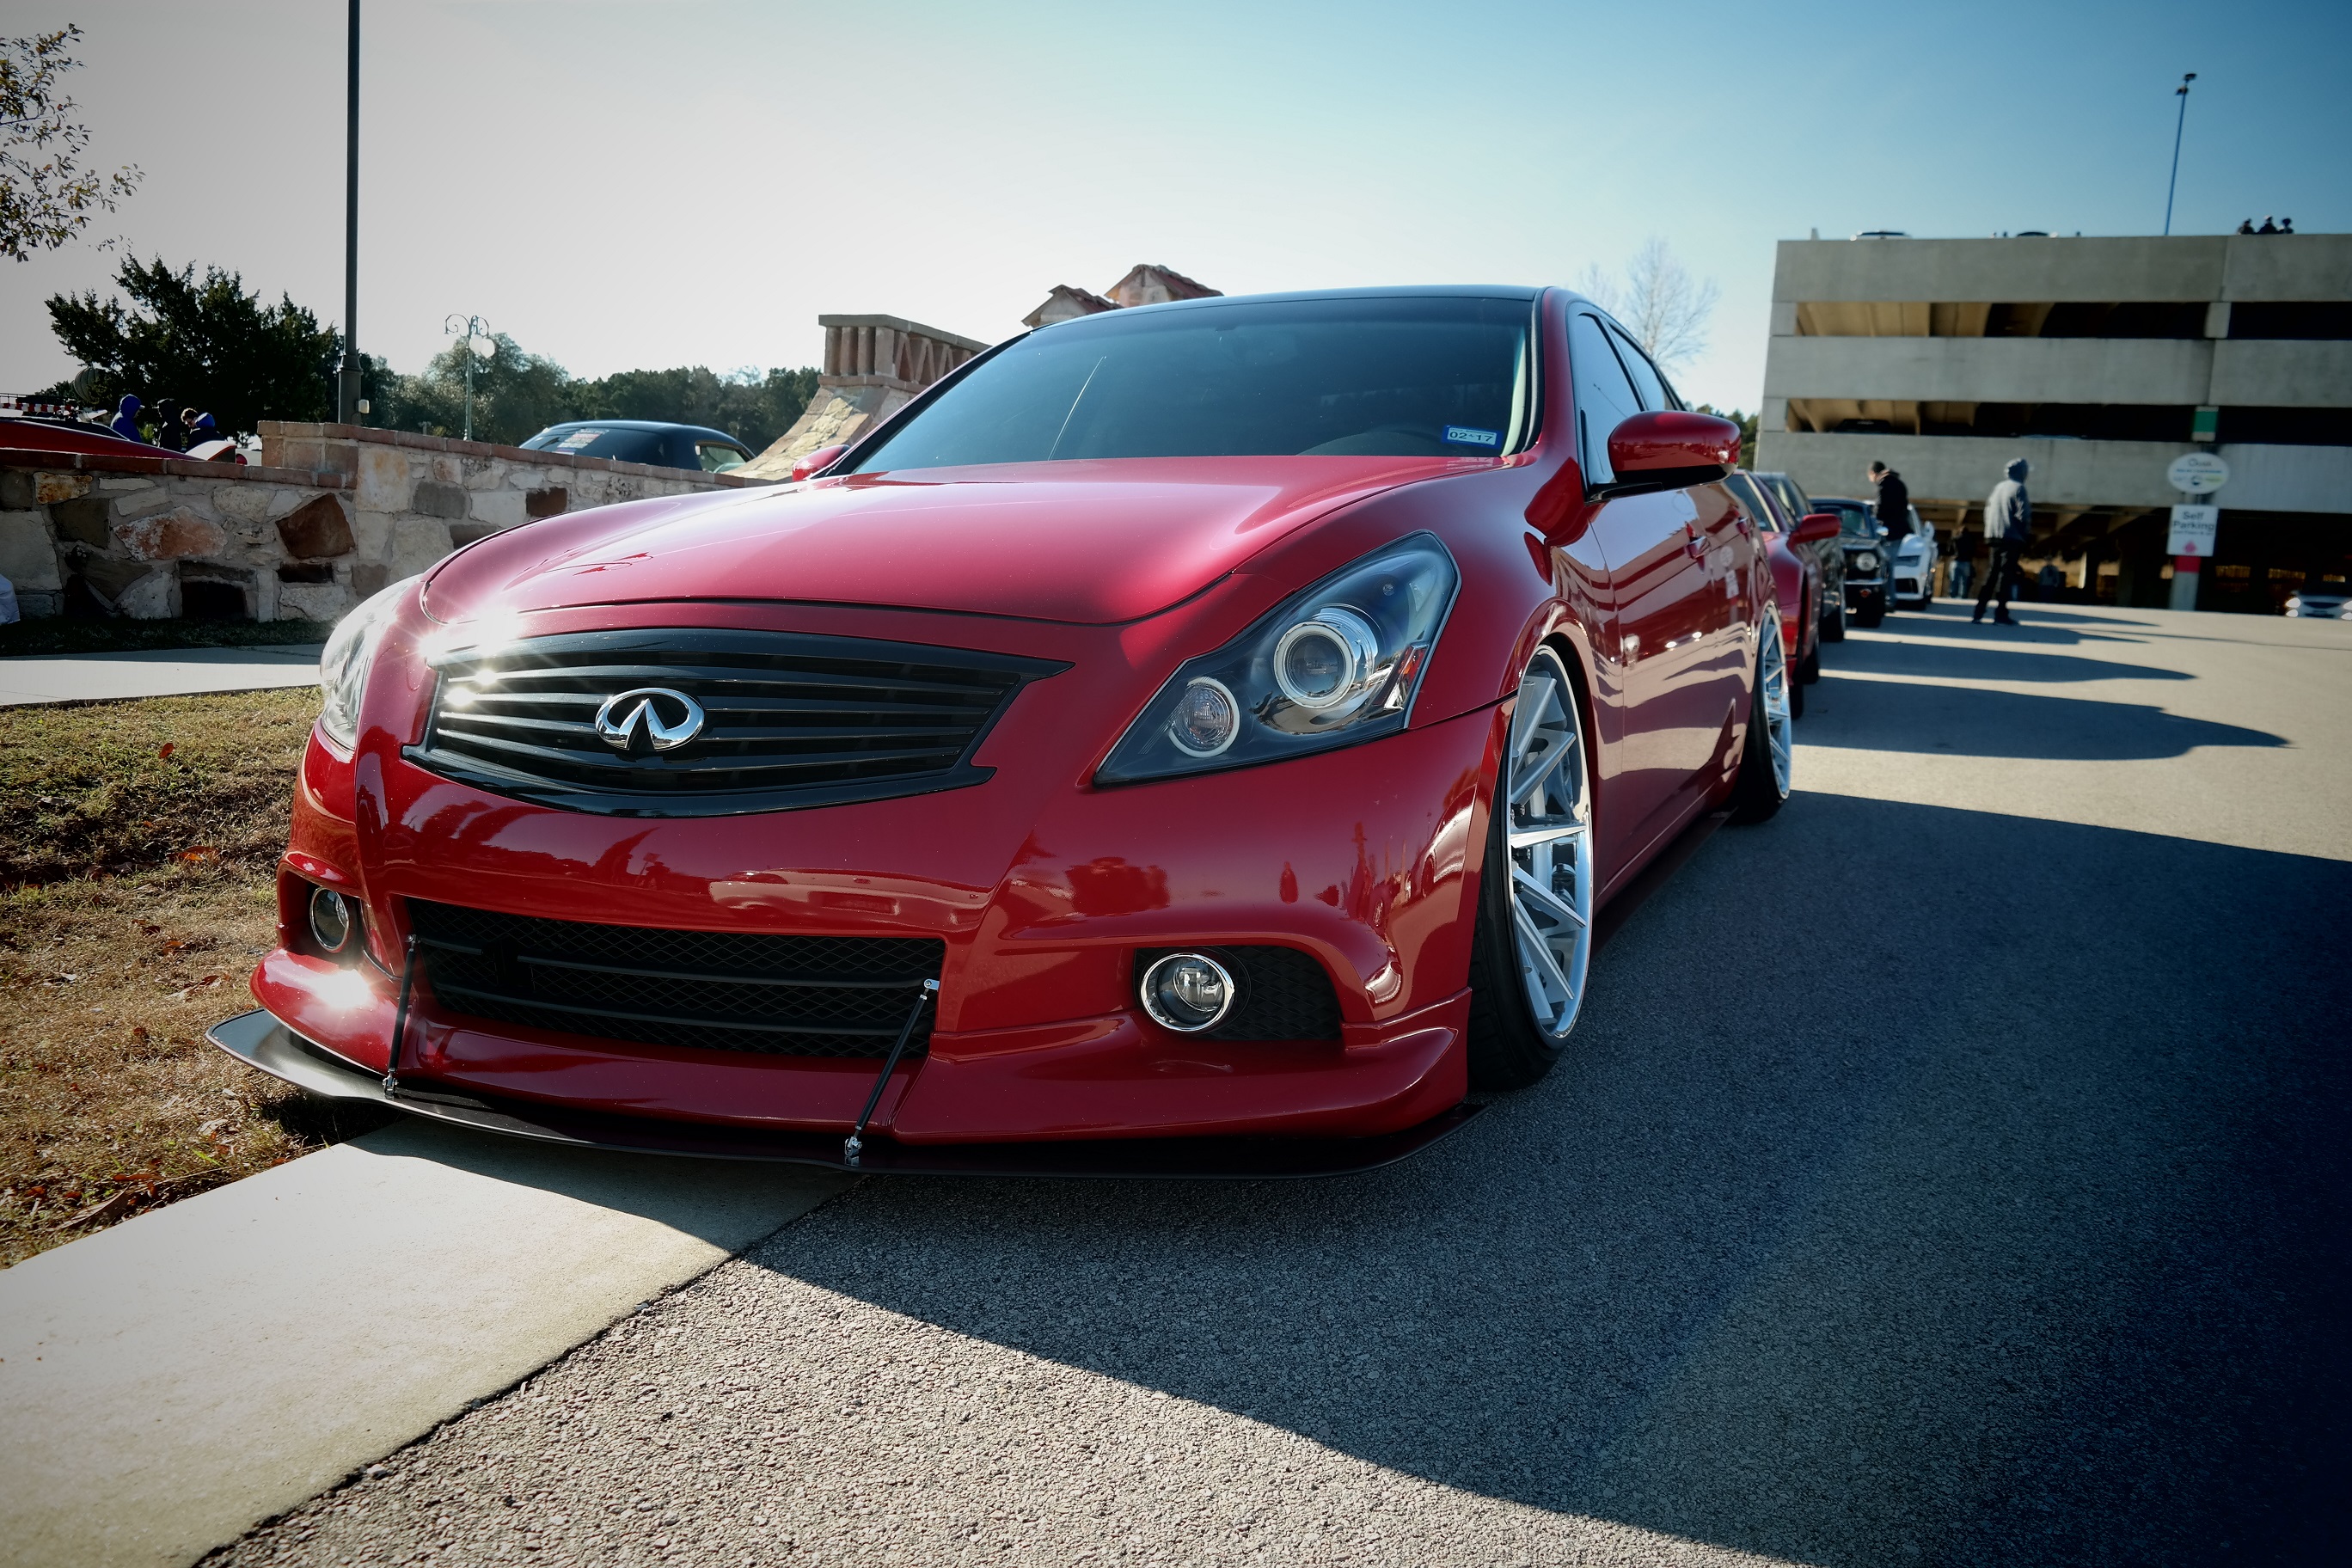 List Of Synonyms And Antonyms The Word G37 Sedan.